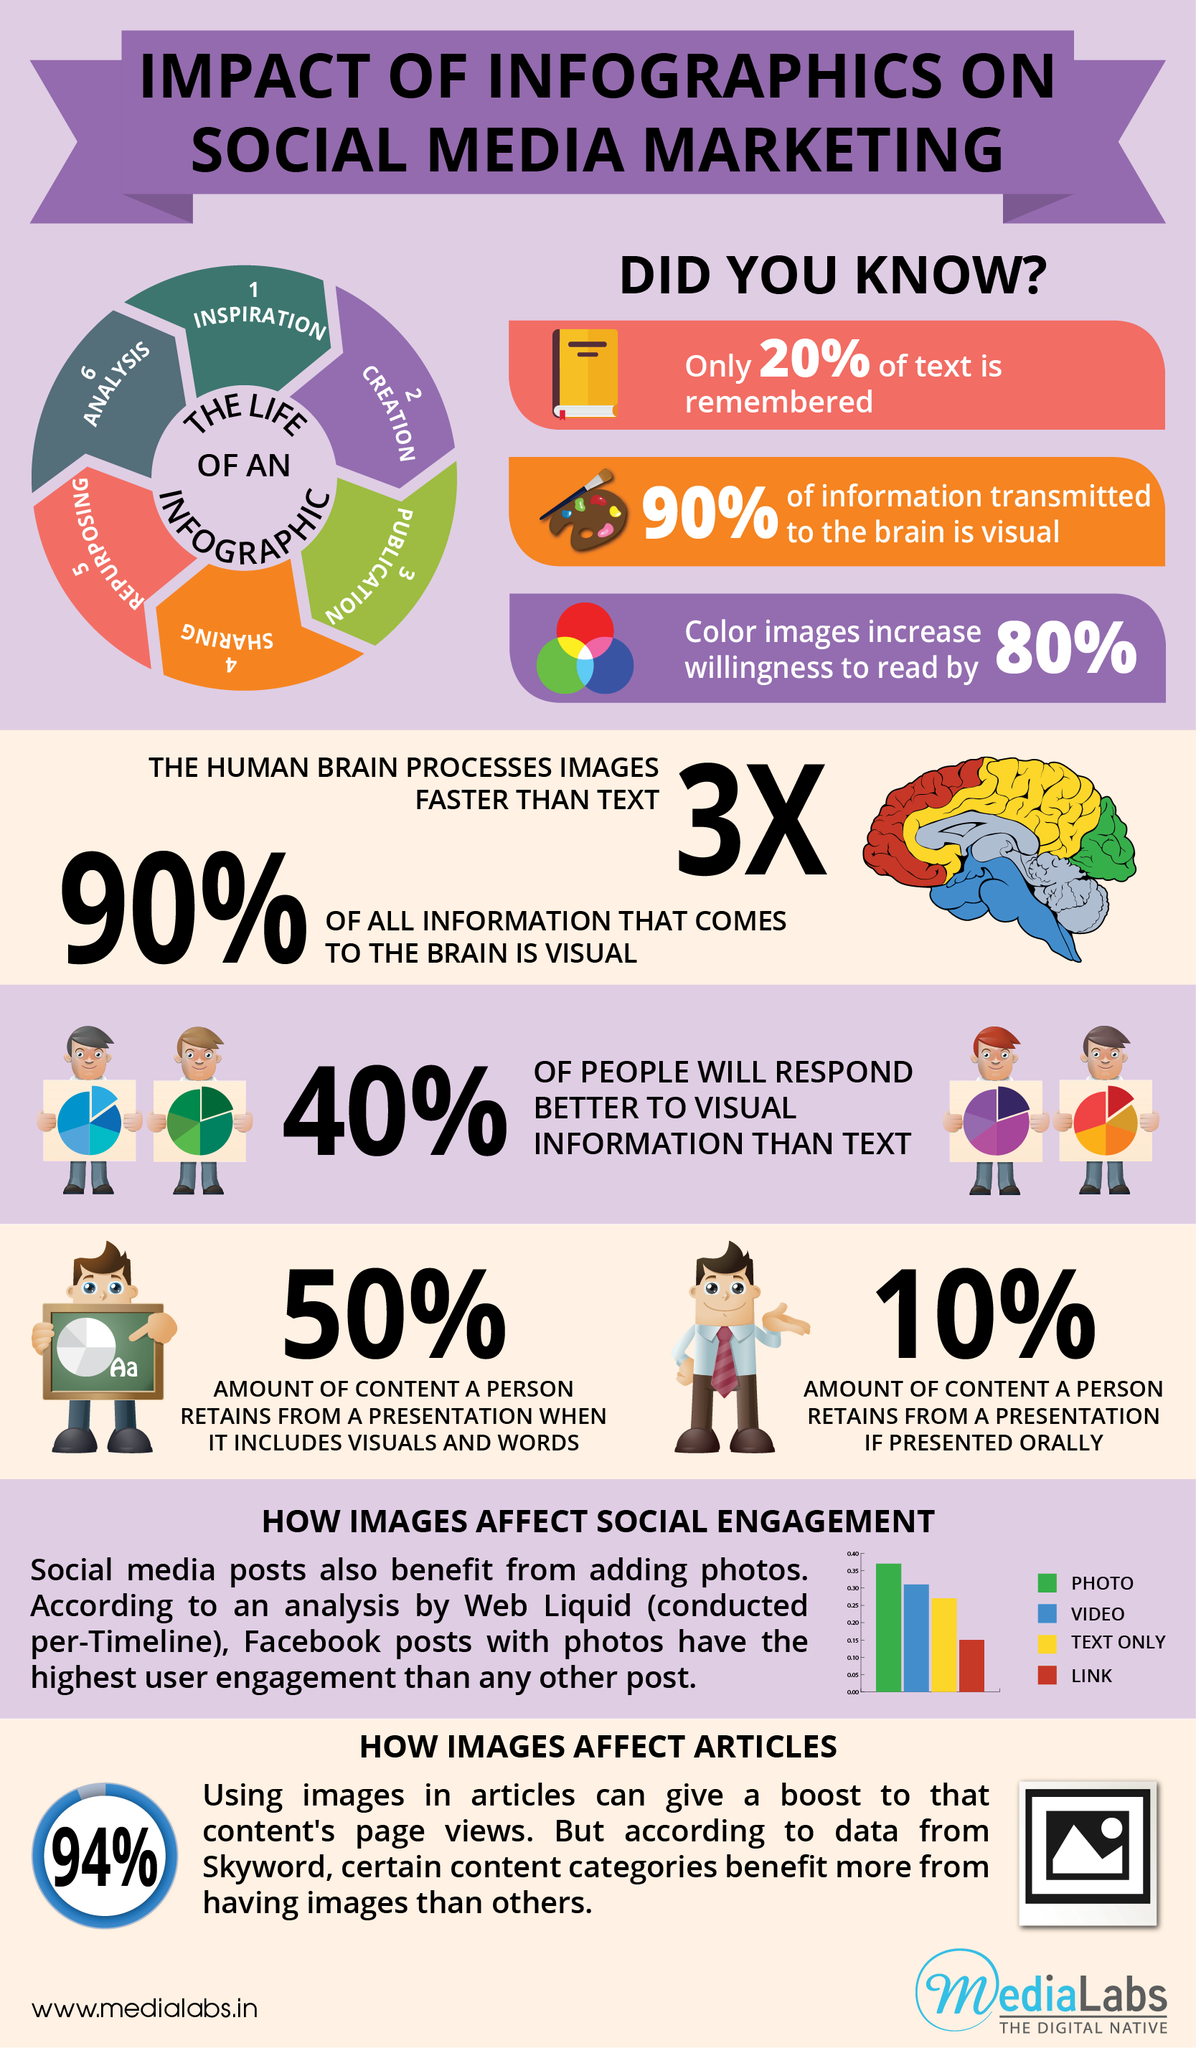 5 Social Media Marketing Predictions for 2014 [Infographic] - Business 2 Community